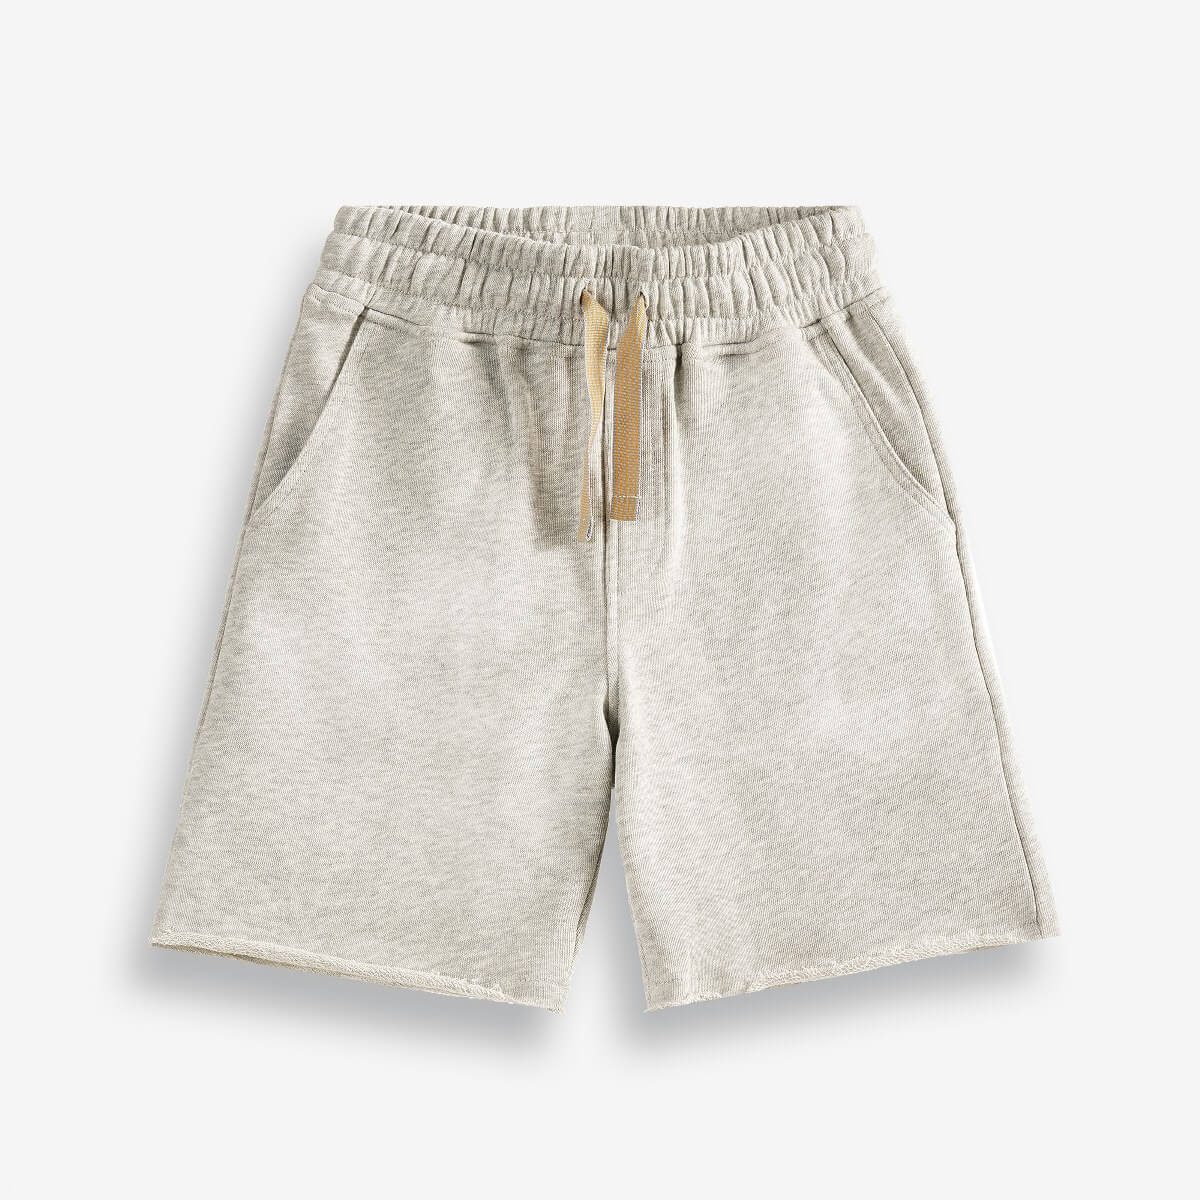 Boy's Shorts with an Elastic Waistband and Ties